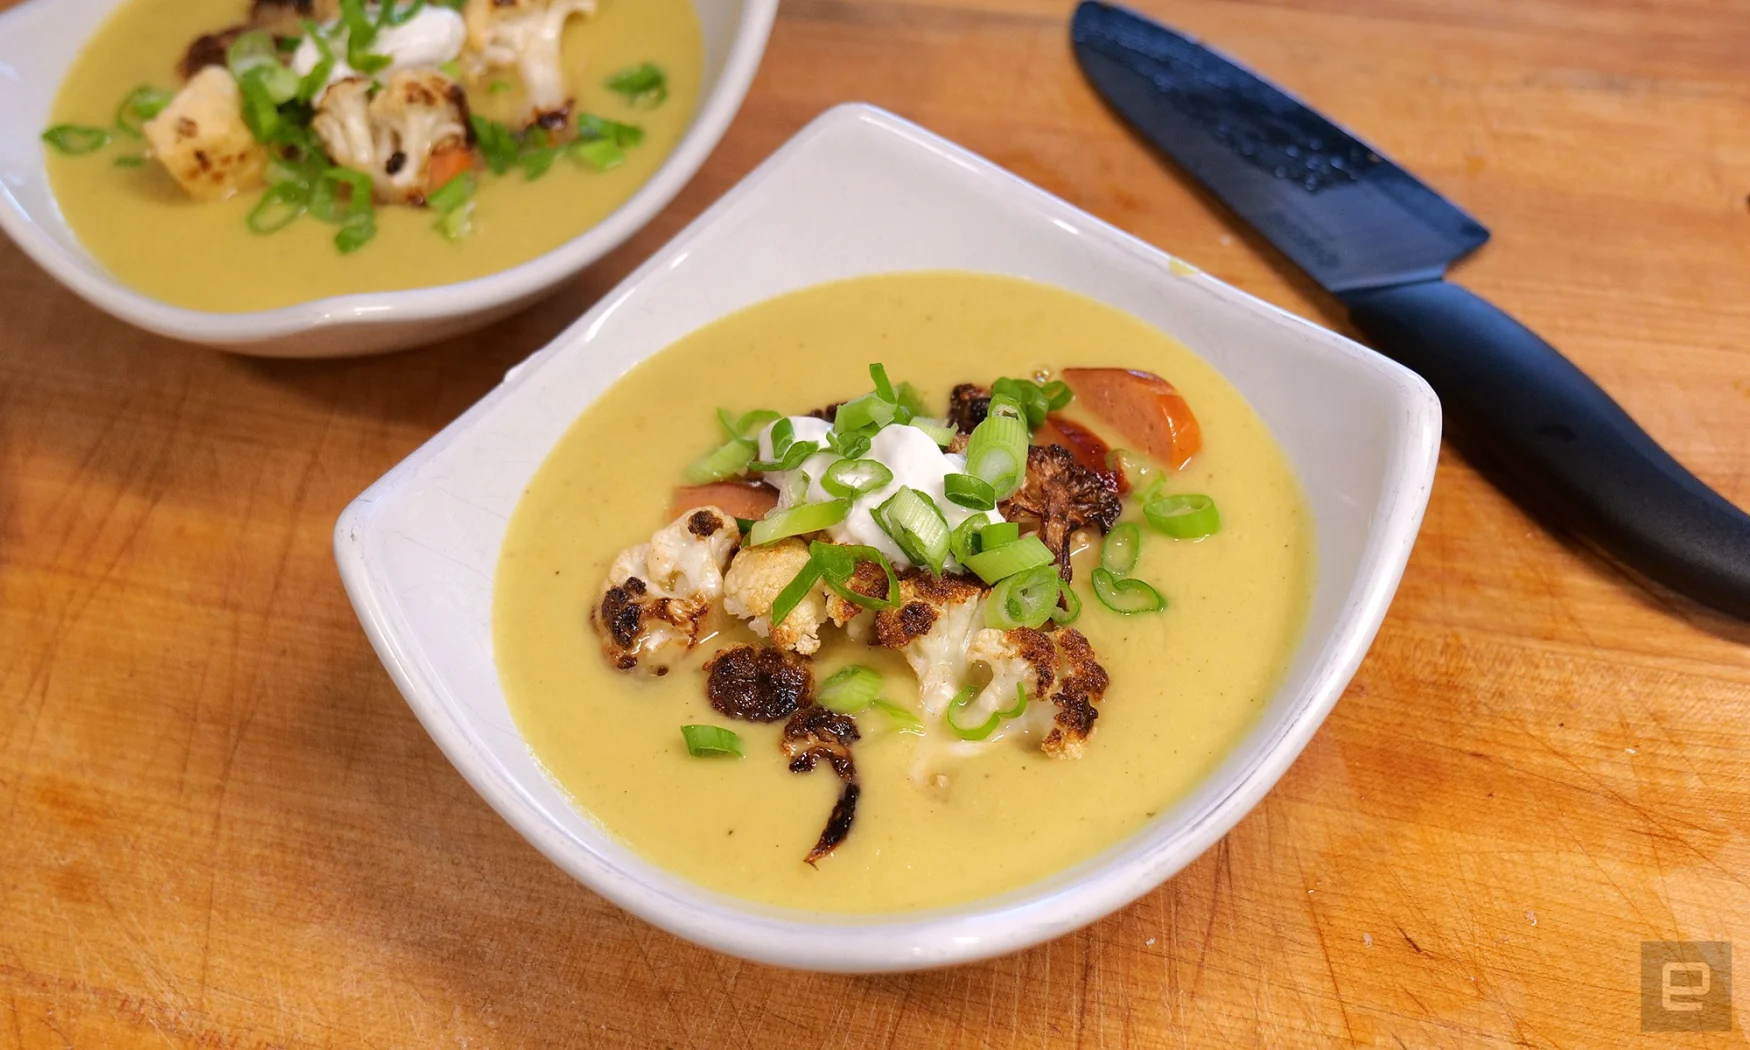 Immersion blenders are extremely useful kitchen gadgets, especially when it comes to making creamy soups like roasted cauliflower soup. 